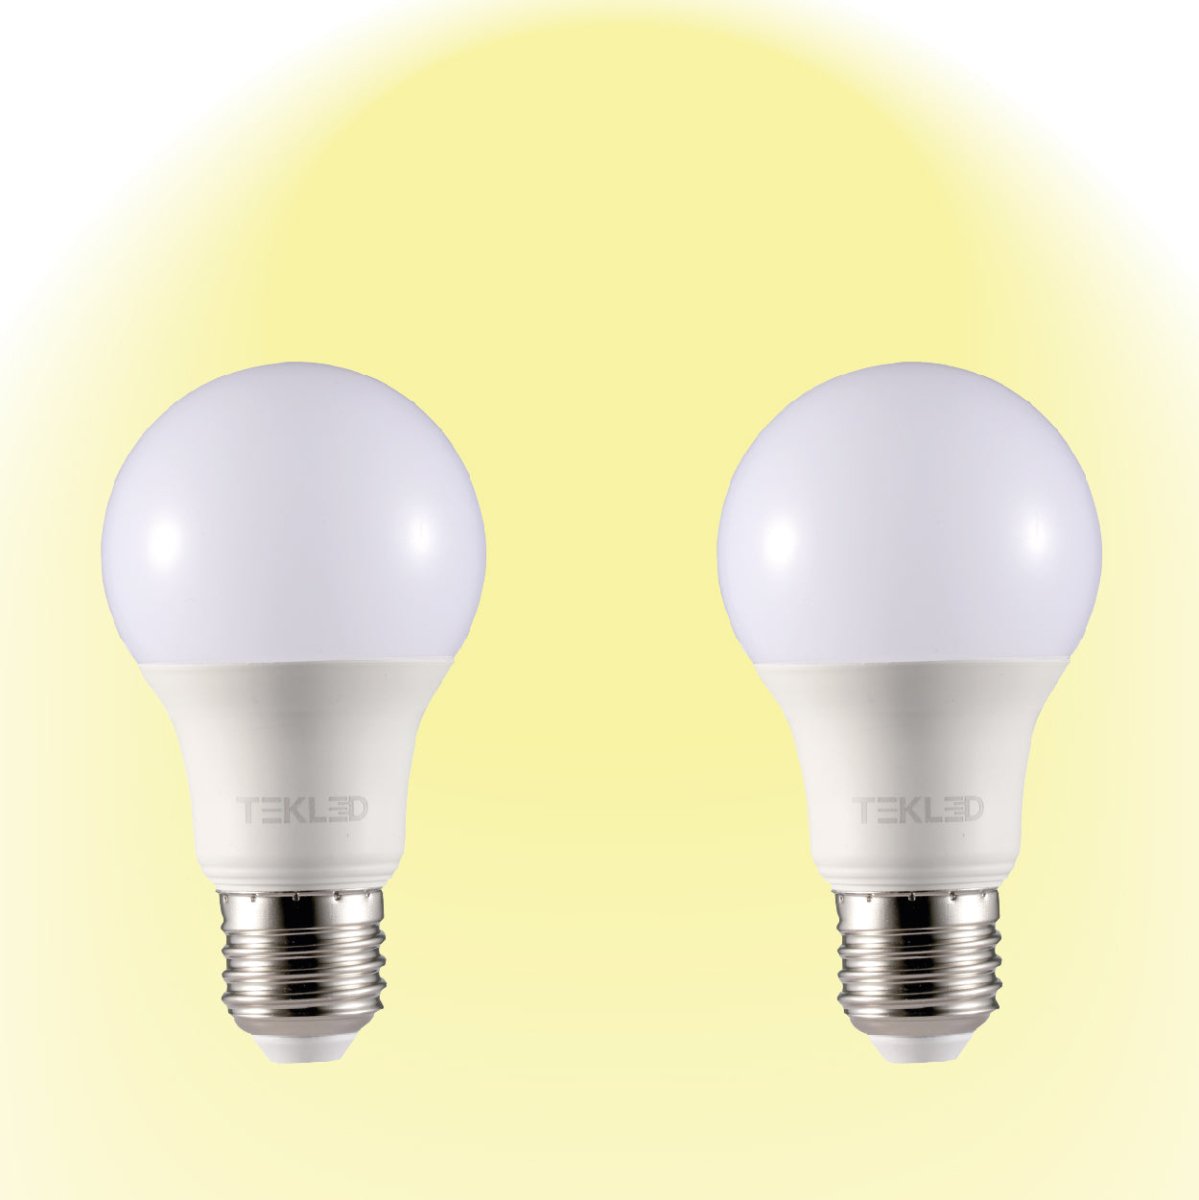 Virgo LED GLS Bulb A60 Dimmable E27 Edison Screw 2700K Warm White 7 W Pack of 2 527-15616